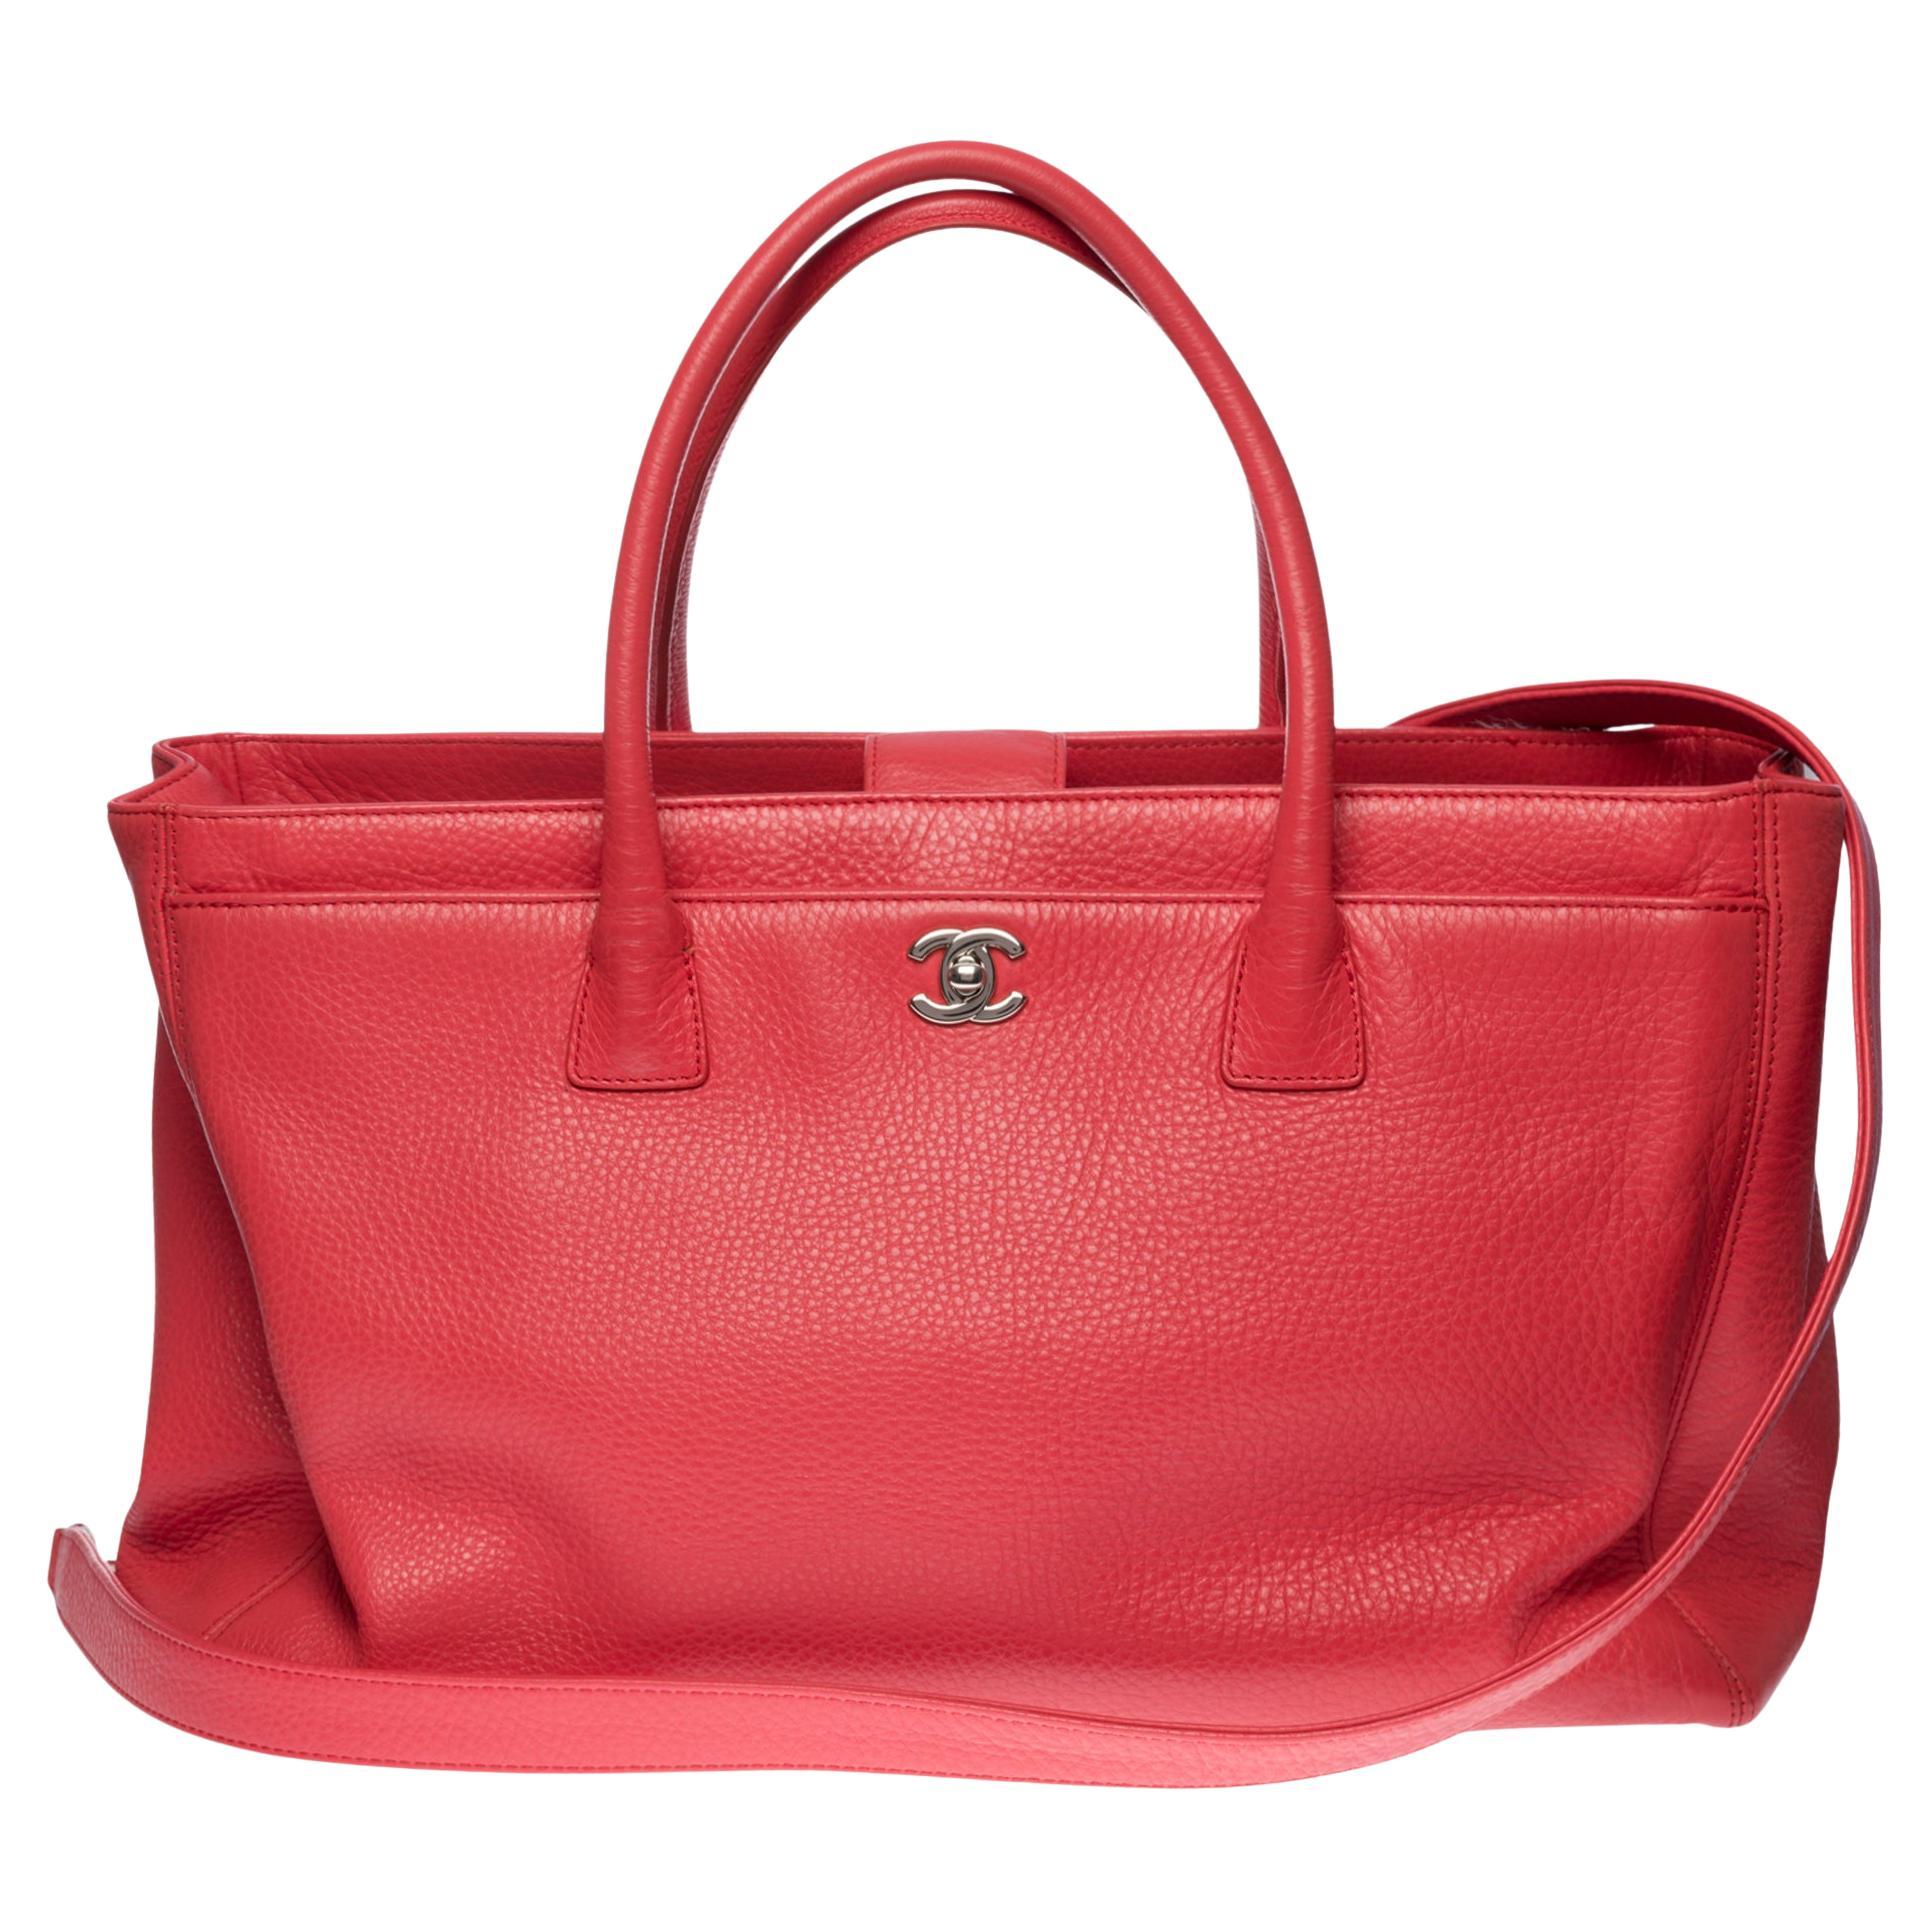 Chanel Executive Tote bag with shoulder strap in coral pink